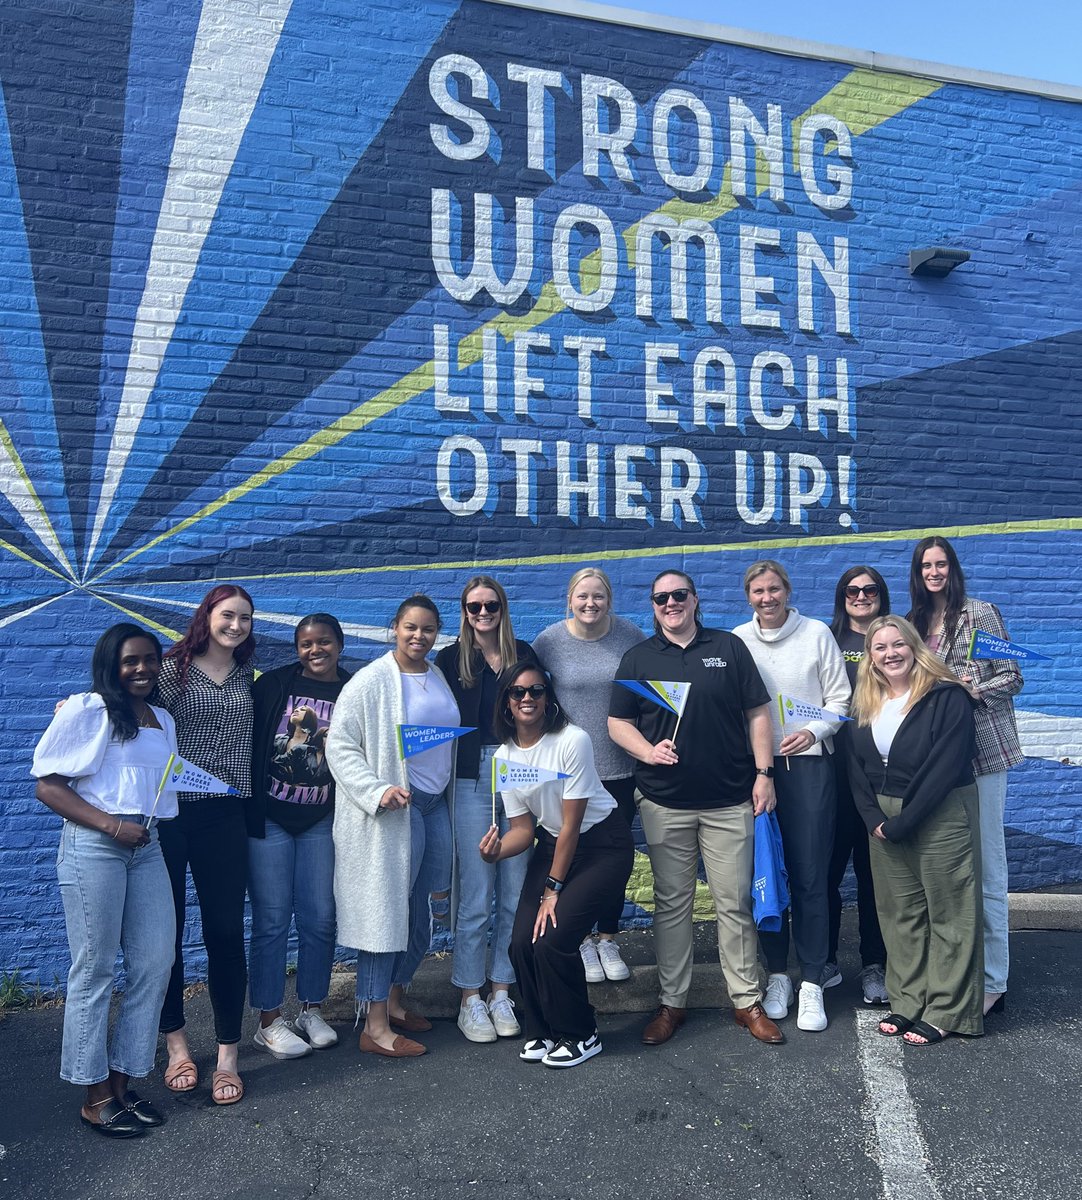 We 💙 when members stop by Women Leaders HQ in Kansas City. It was great to see you, @DrKayMcCauley! Thanks for connecting with our staff. #WomenLeadersInSports